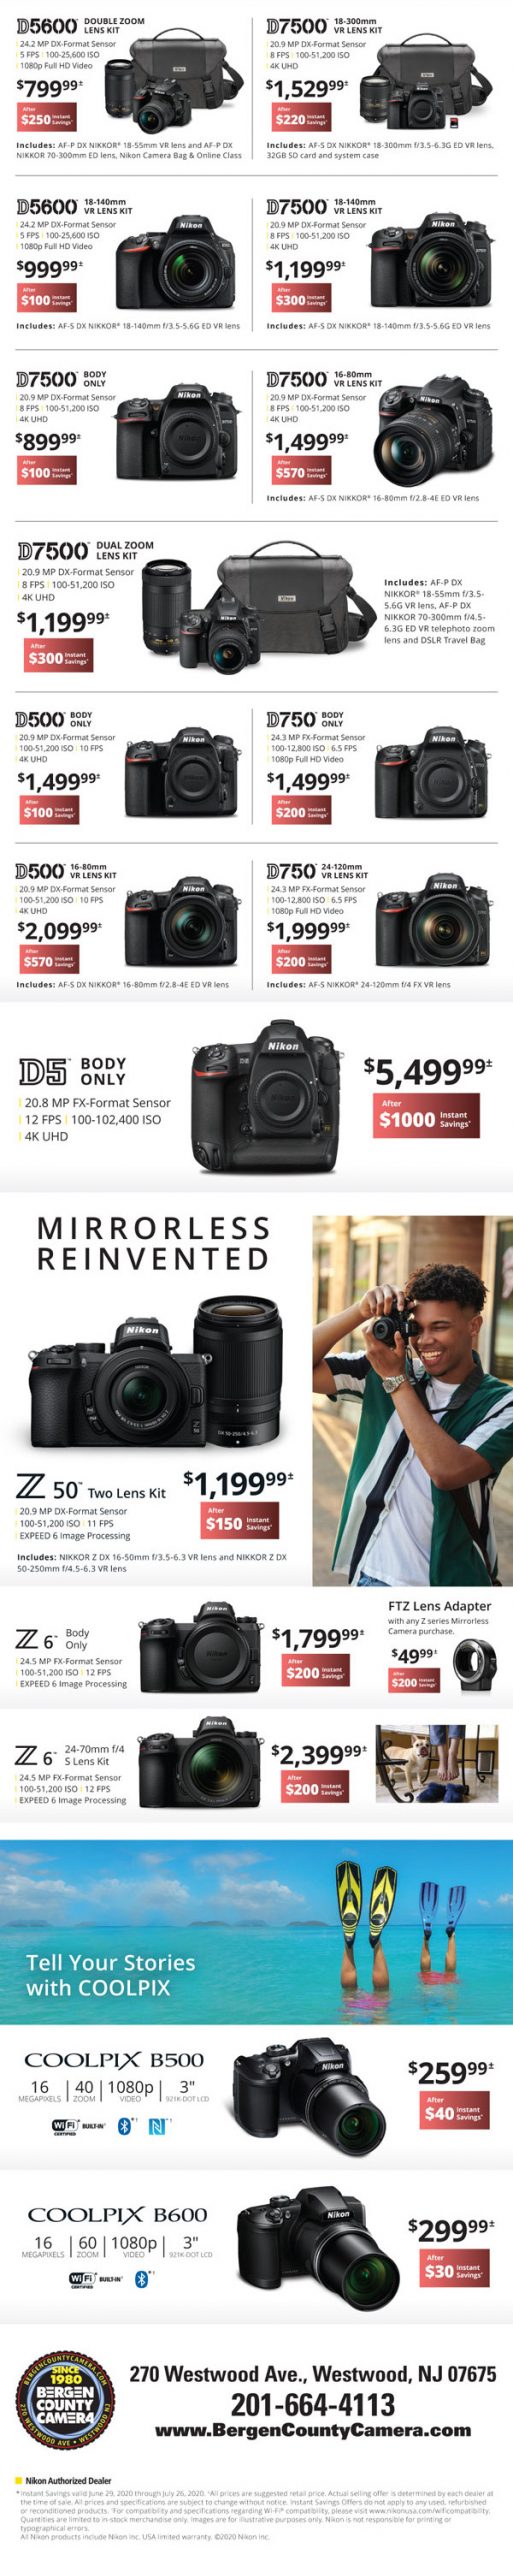 D5600 double zoom lens kit $799.99 after $250 instant savings - D7500 18-300mm VR lens kit $1529.99 after $220 instant savings - D5600 18-140mm VR lens kit $999.99 after $100 instant rebate - D7500 18-140mm VR lens kit $1199.99 after $300 instant savings - D7500 body only $899.99 after $100 instant savings - D7500 16-80mm VR lens $1499.99 after $570 instant rebate - D7500 dual zoom lens kit $1199.99 after $300 instant savings - D500 body only $1499.99 after $100 instant savings - D750 body only $1499.99 after $200 instant savings - D500 16-80mm VR lens kit $2099.99 after $570 instant savings - D750 24-120mm VR lens kit $1999.99 after $200 instant savings - D5 body only $5499.99 after $1000 instant savings - Z50 two lens kit $1199.99 after $150 instant savings - Z6 body only $1799.99 after $200 instant savings - FTZ lens adapter with any Z series mirrorless camera purchase $49.99 after $200 instant savings - Z6 24-70mm f/4 S lens kit $2399.99 after $200 instant savings - Coolpix B500 $259.99 after $40 instant savings - Coolpix B600 $299.99 after $30 instant savings